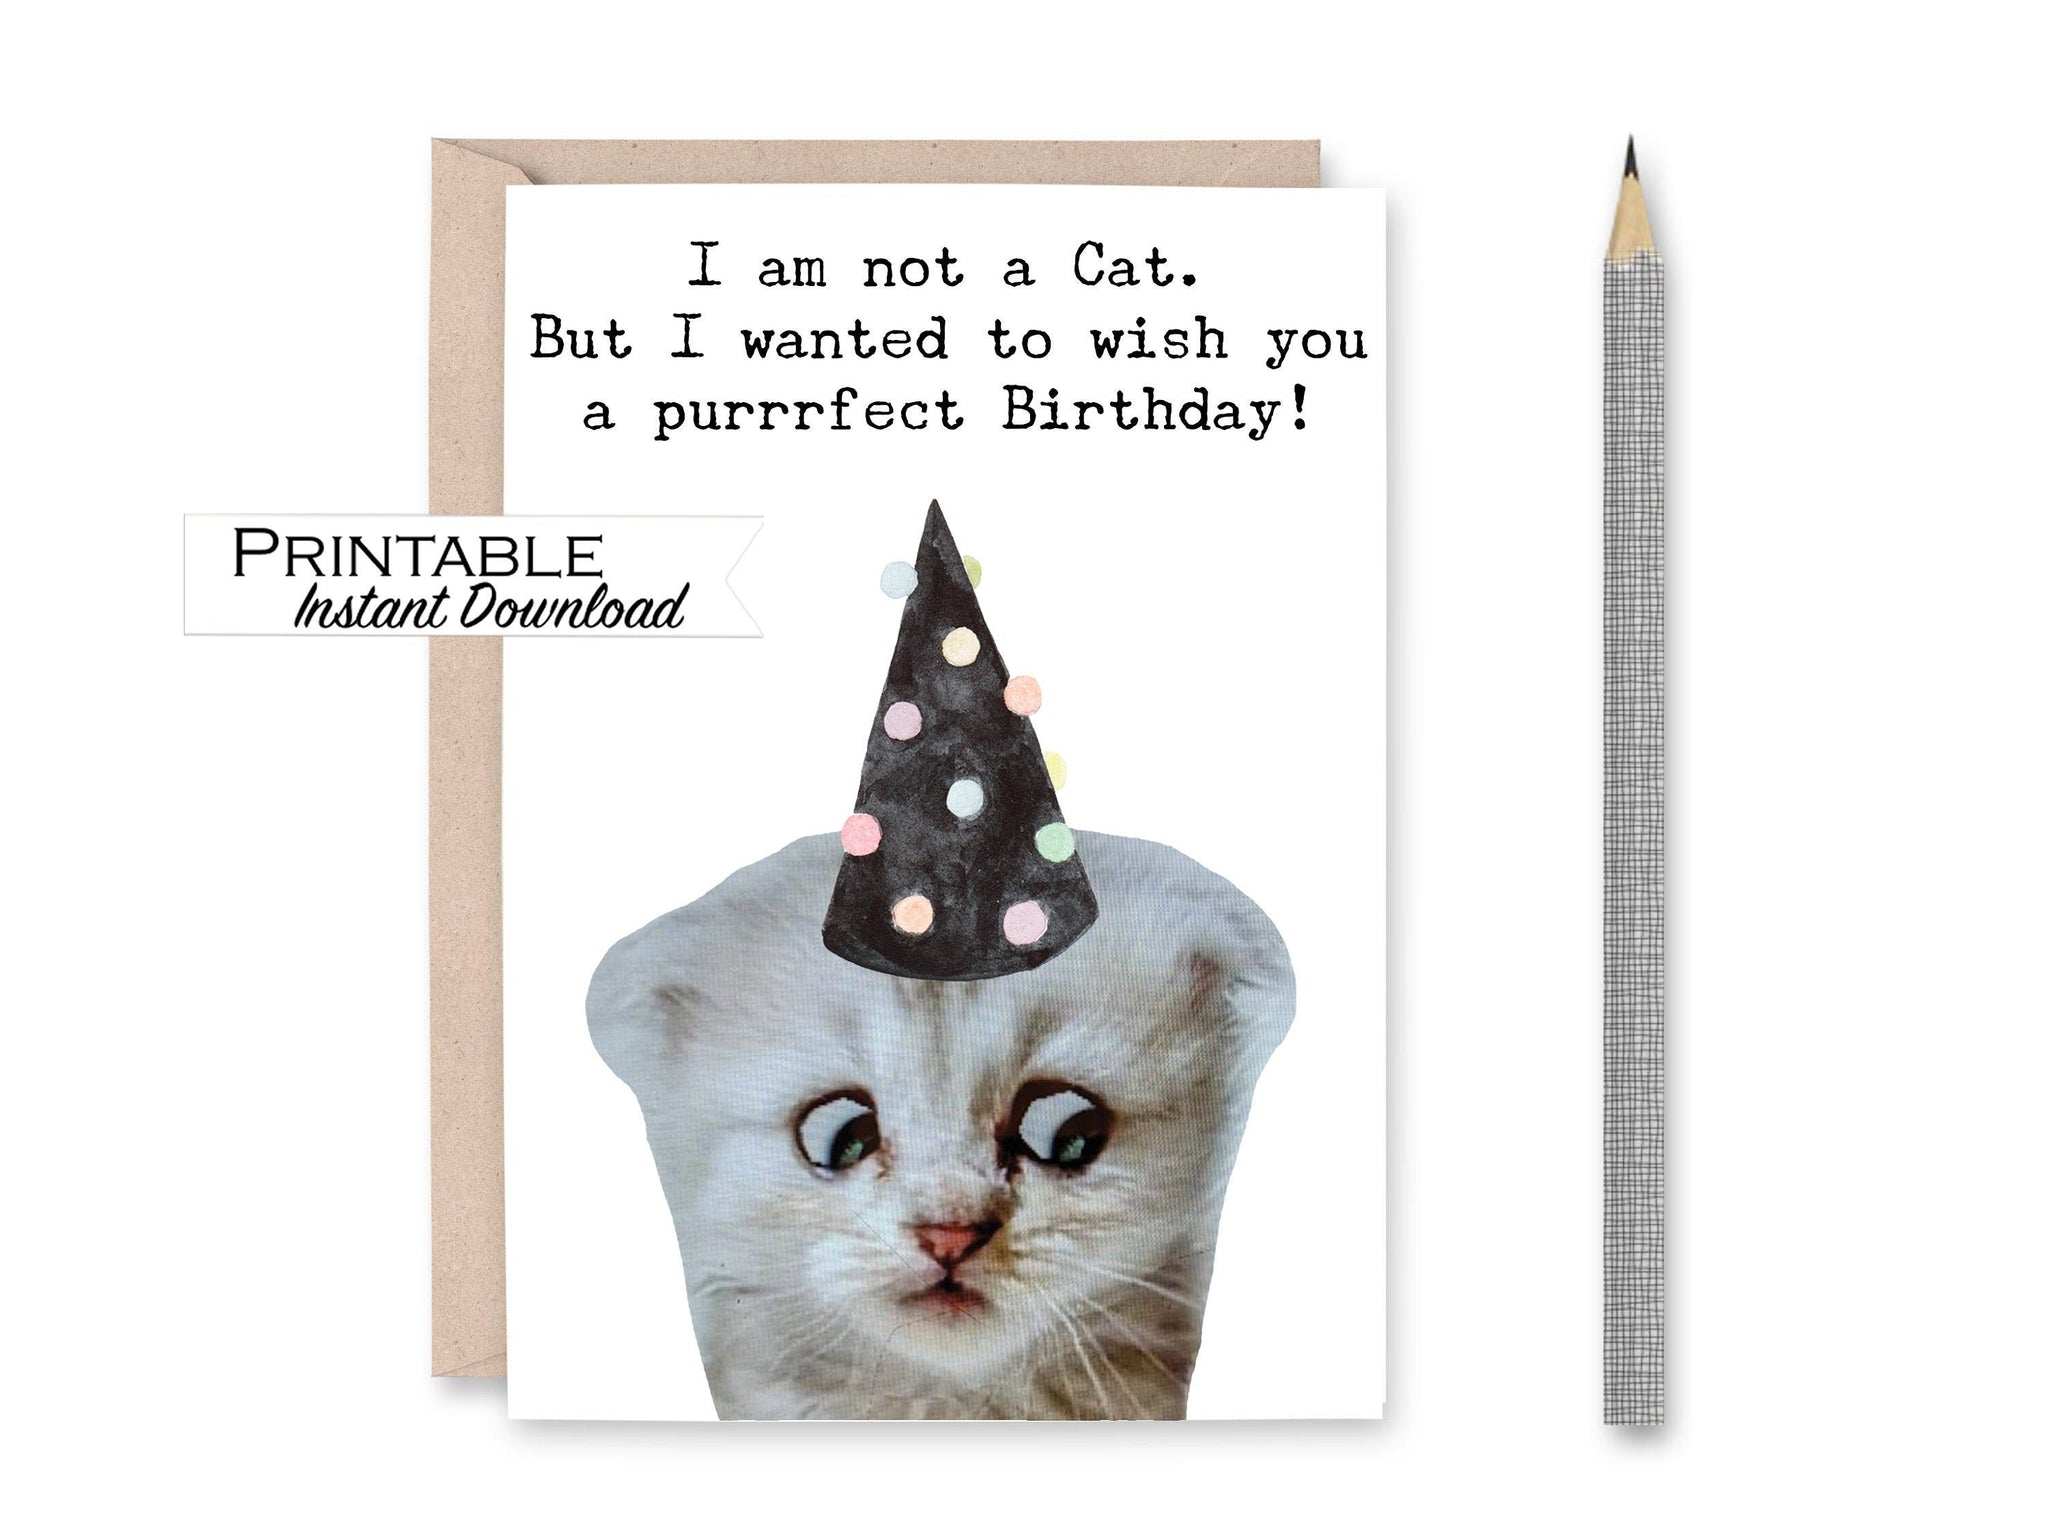 I am Not a Cat - Funny Cat Birthday Card Printable - Digital Download ...